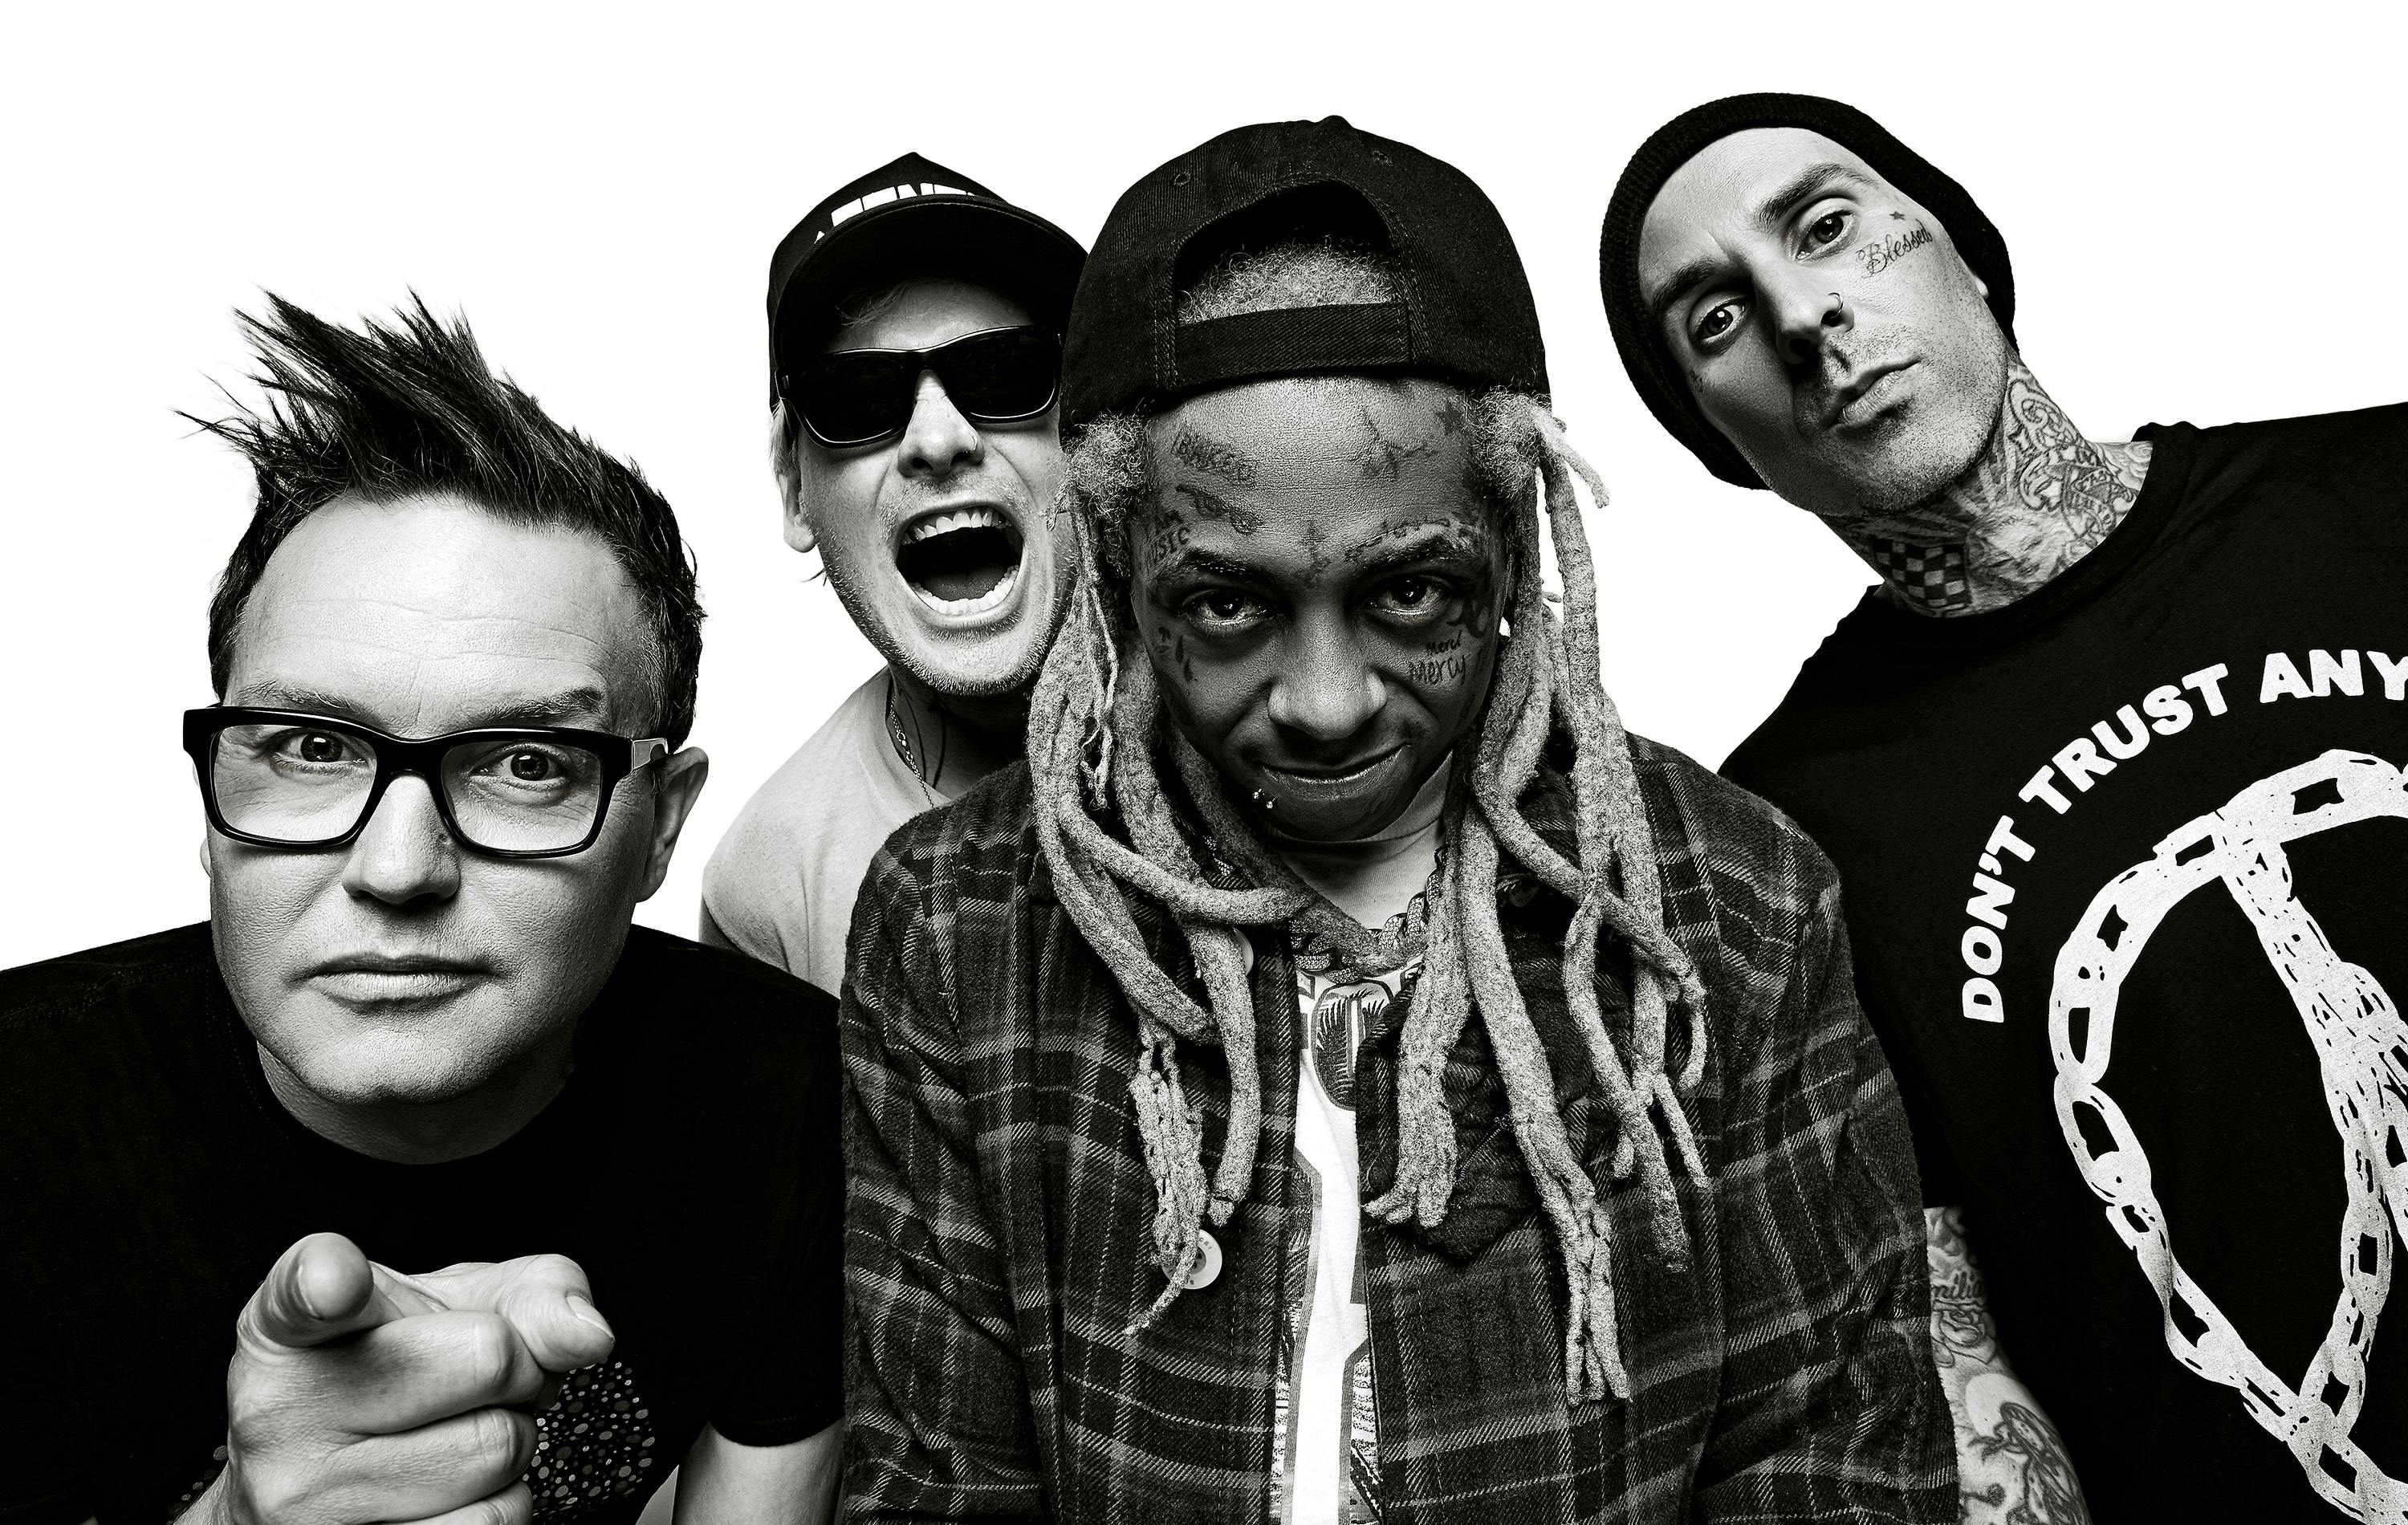 blink-182 Explain Why Lil Wayne Walked Off Stage During Their Co-Headline Tour